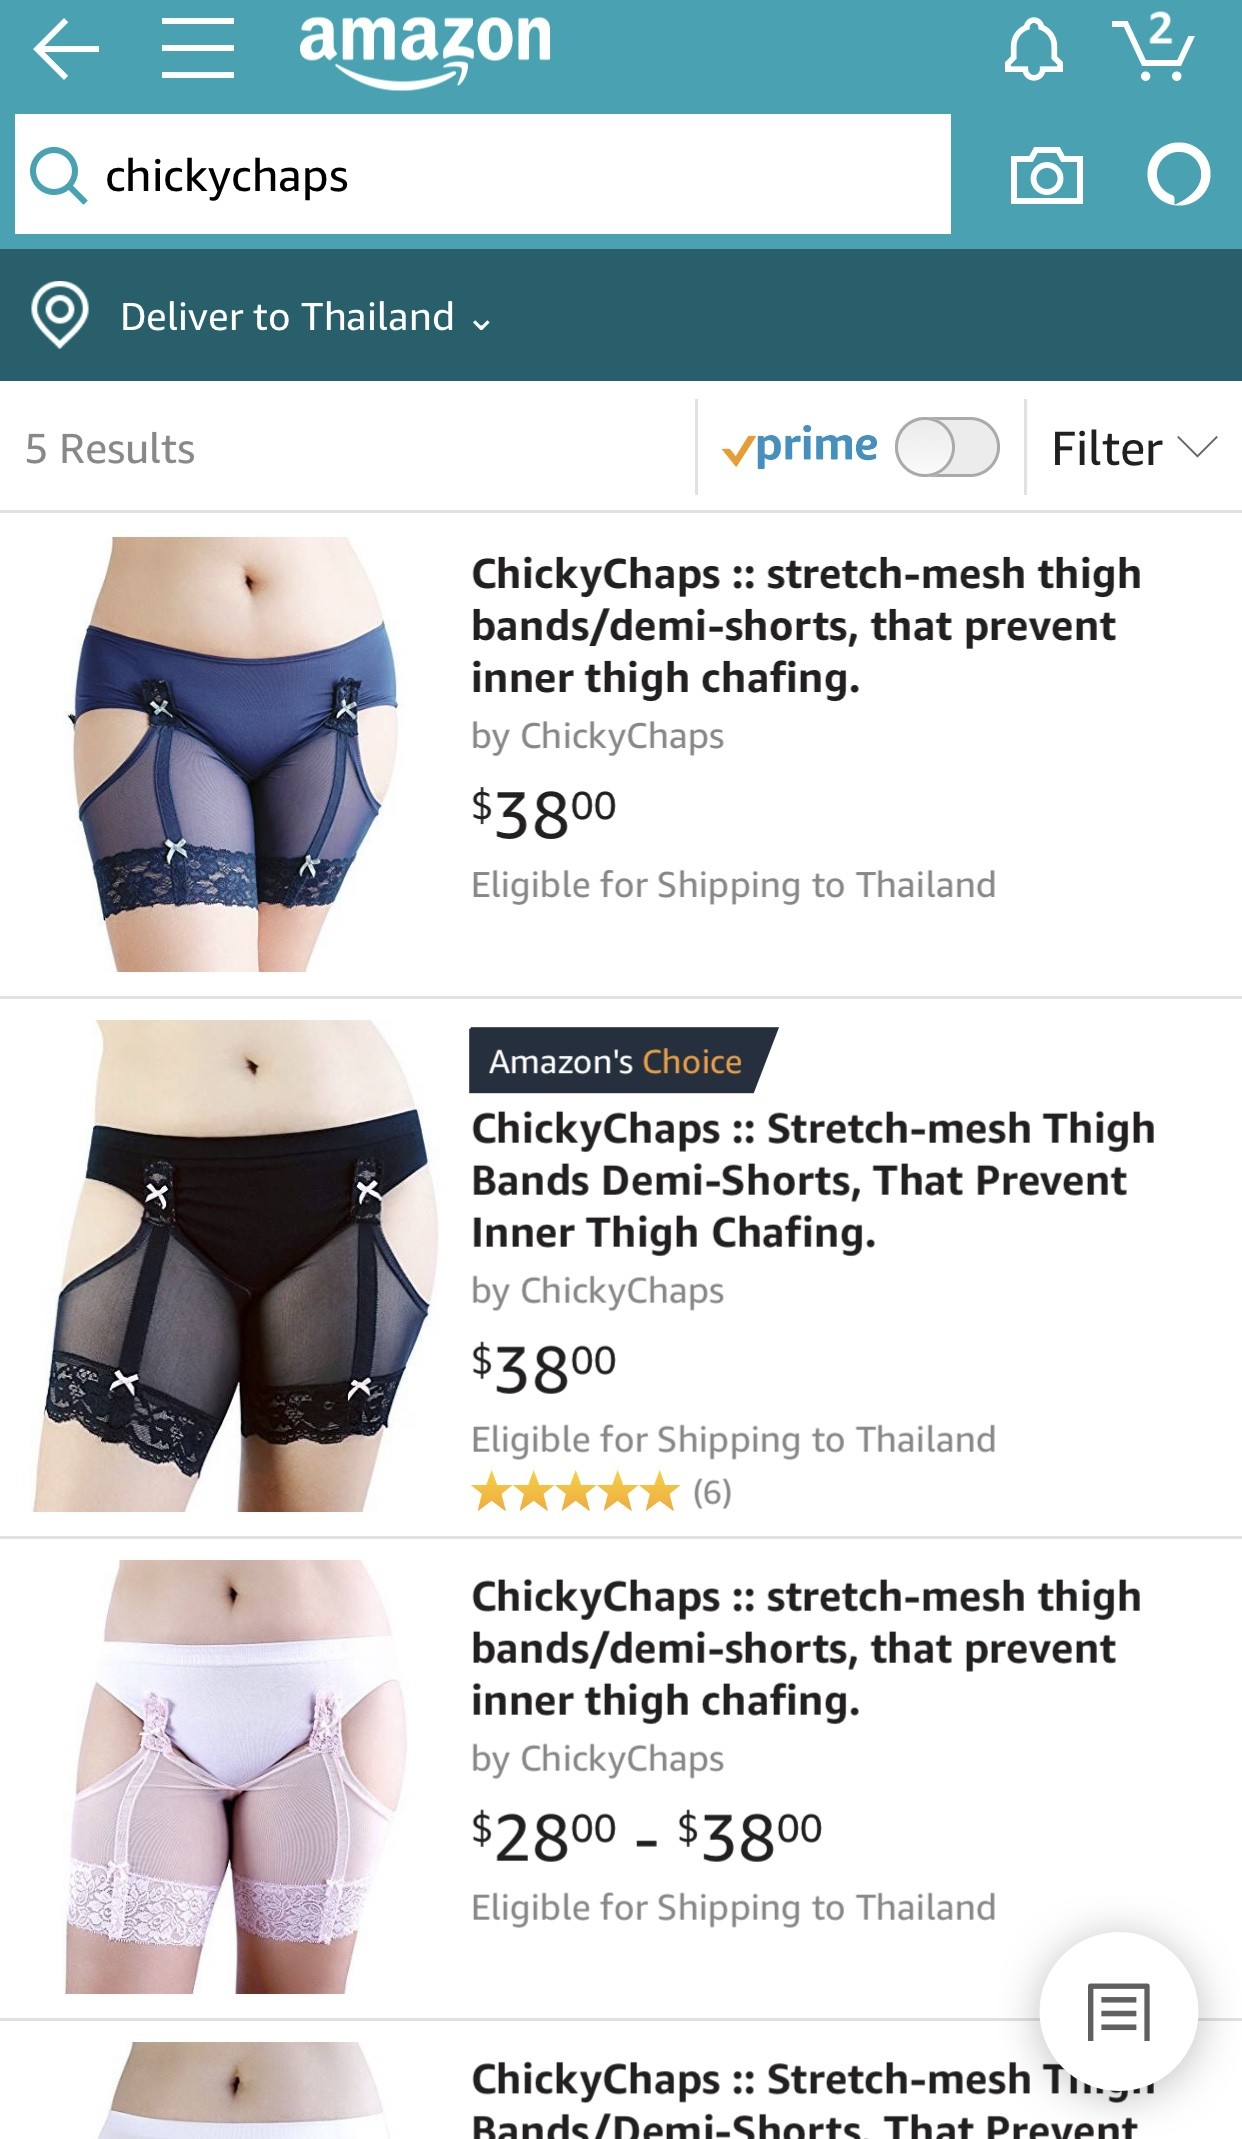 ChickyChaps_amazons_choice_thigh_chafing